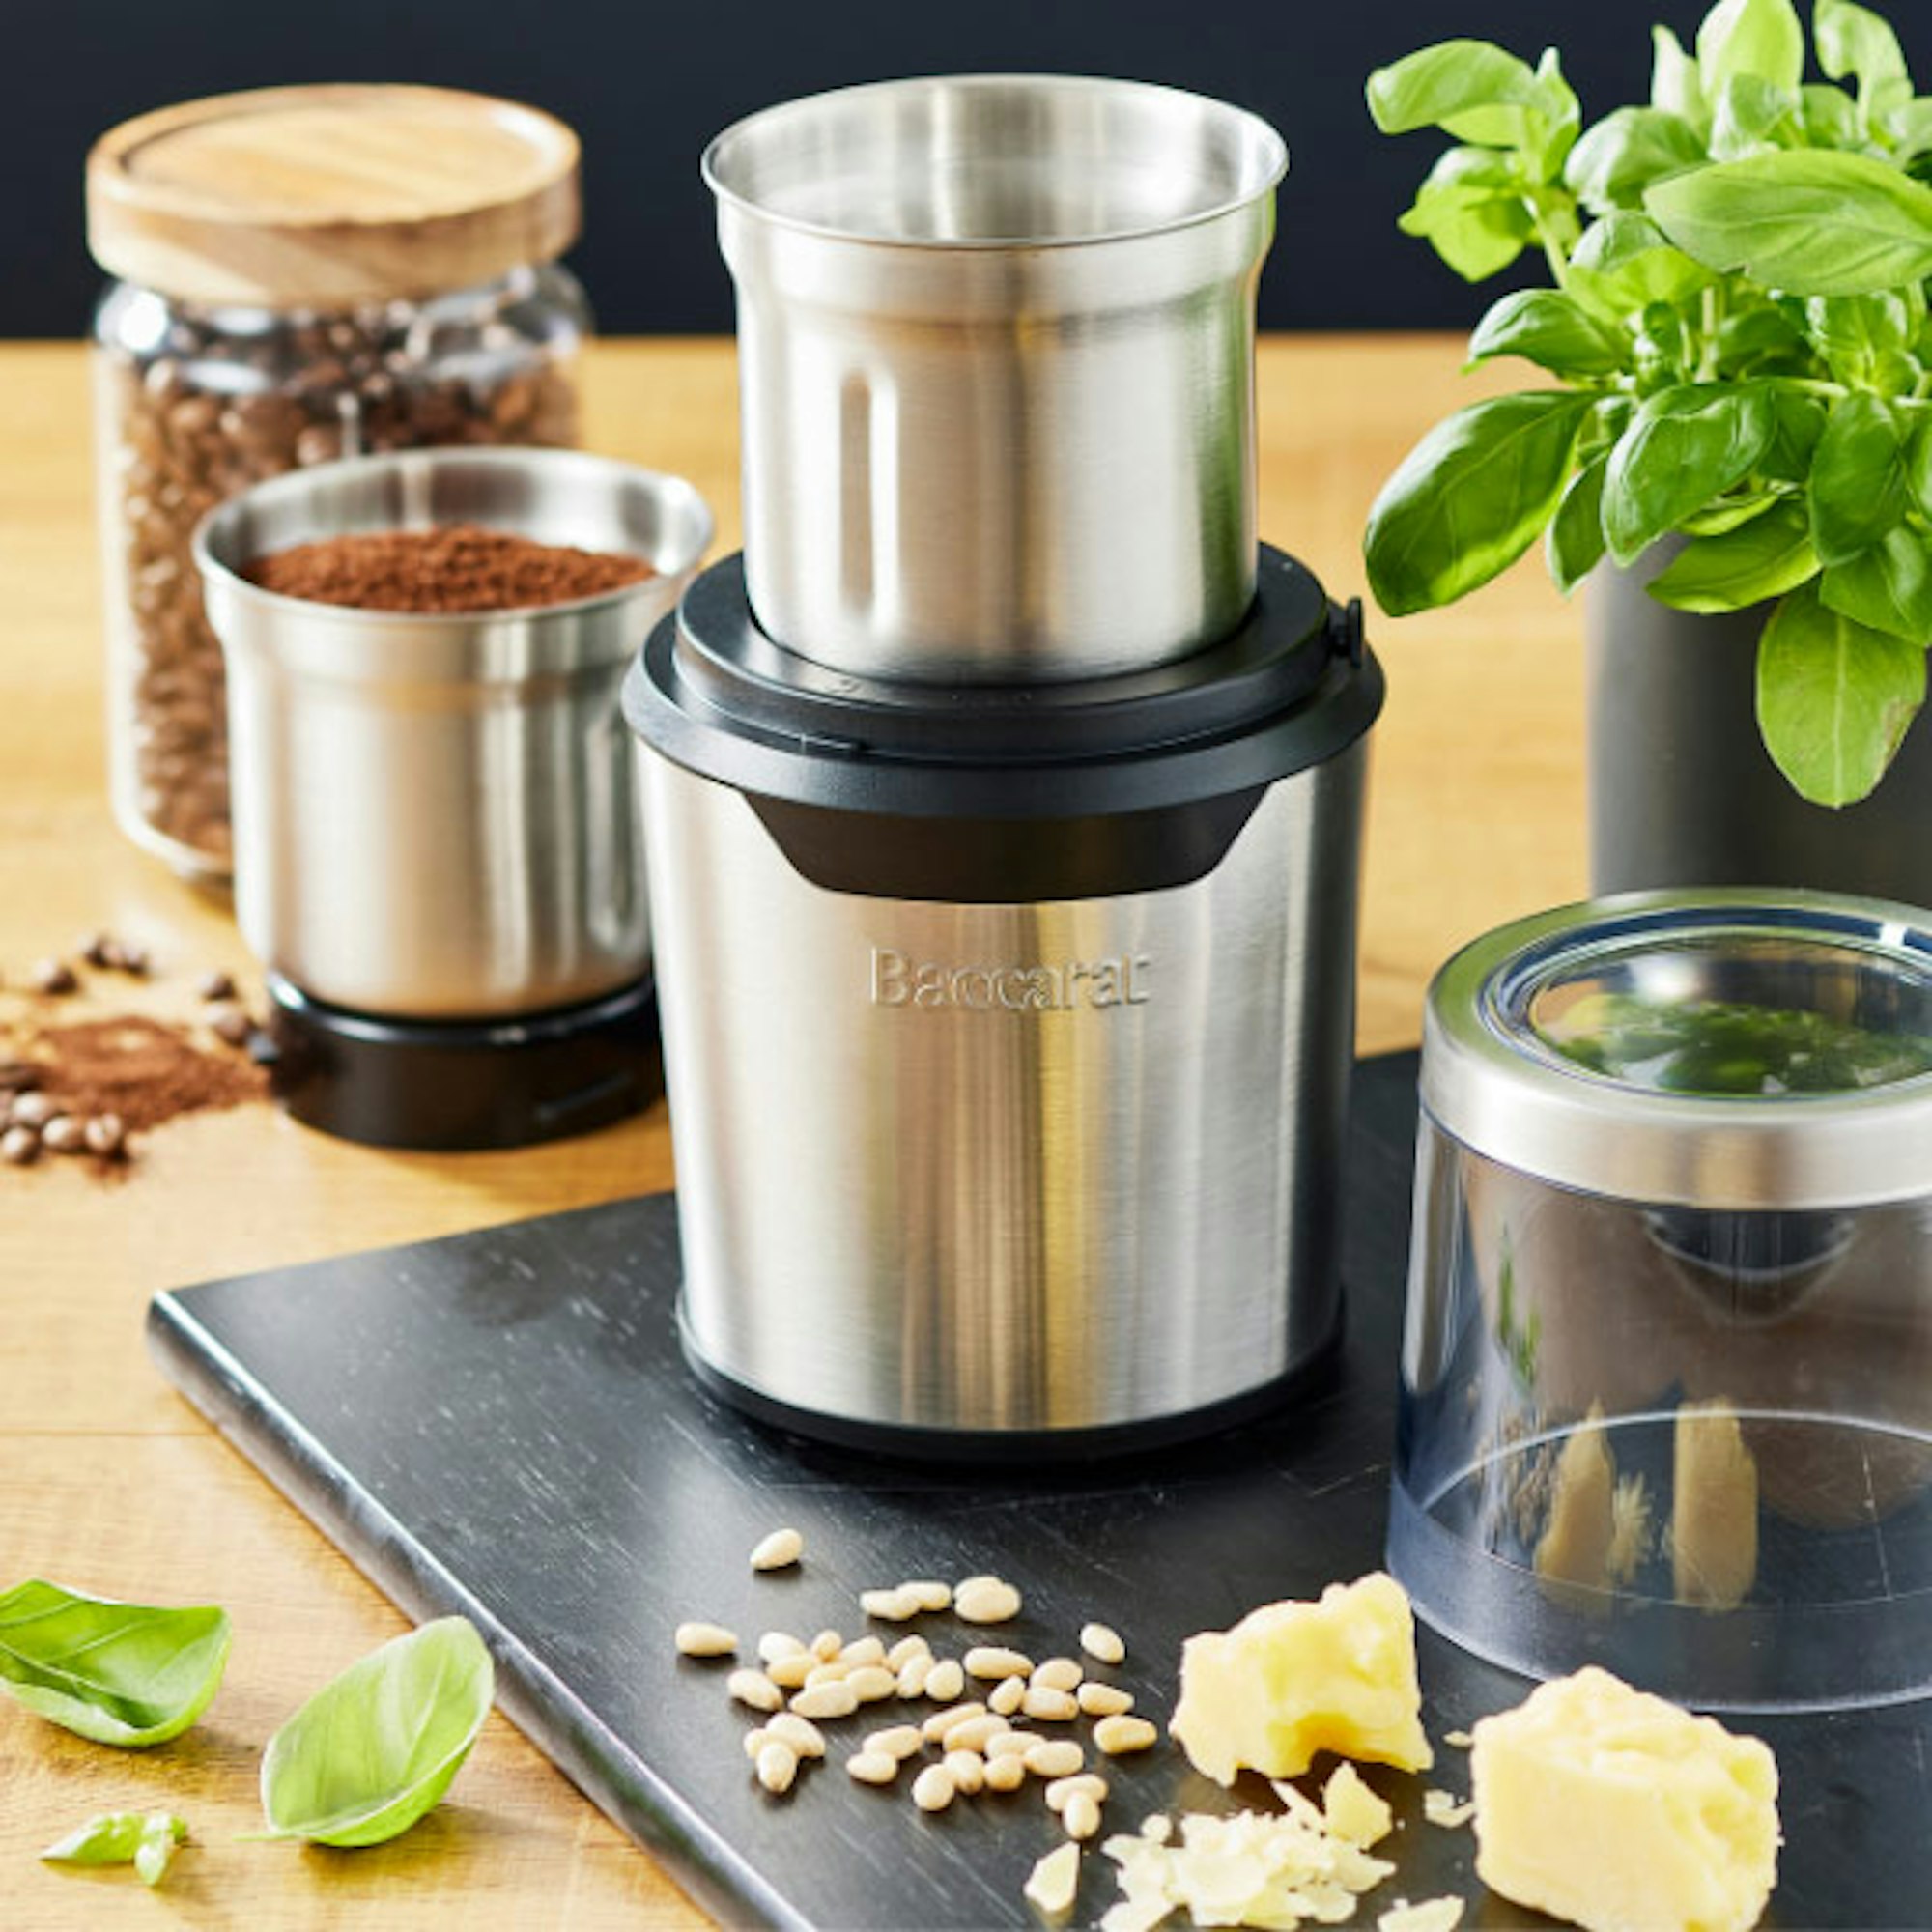 Baccarat The Flavour Maker Coffee & Spice Grinder. Basil Pesto recipe